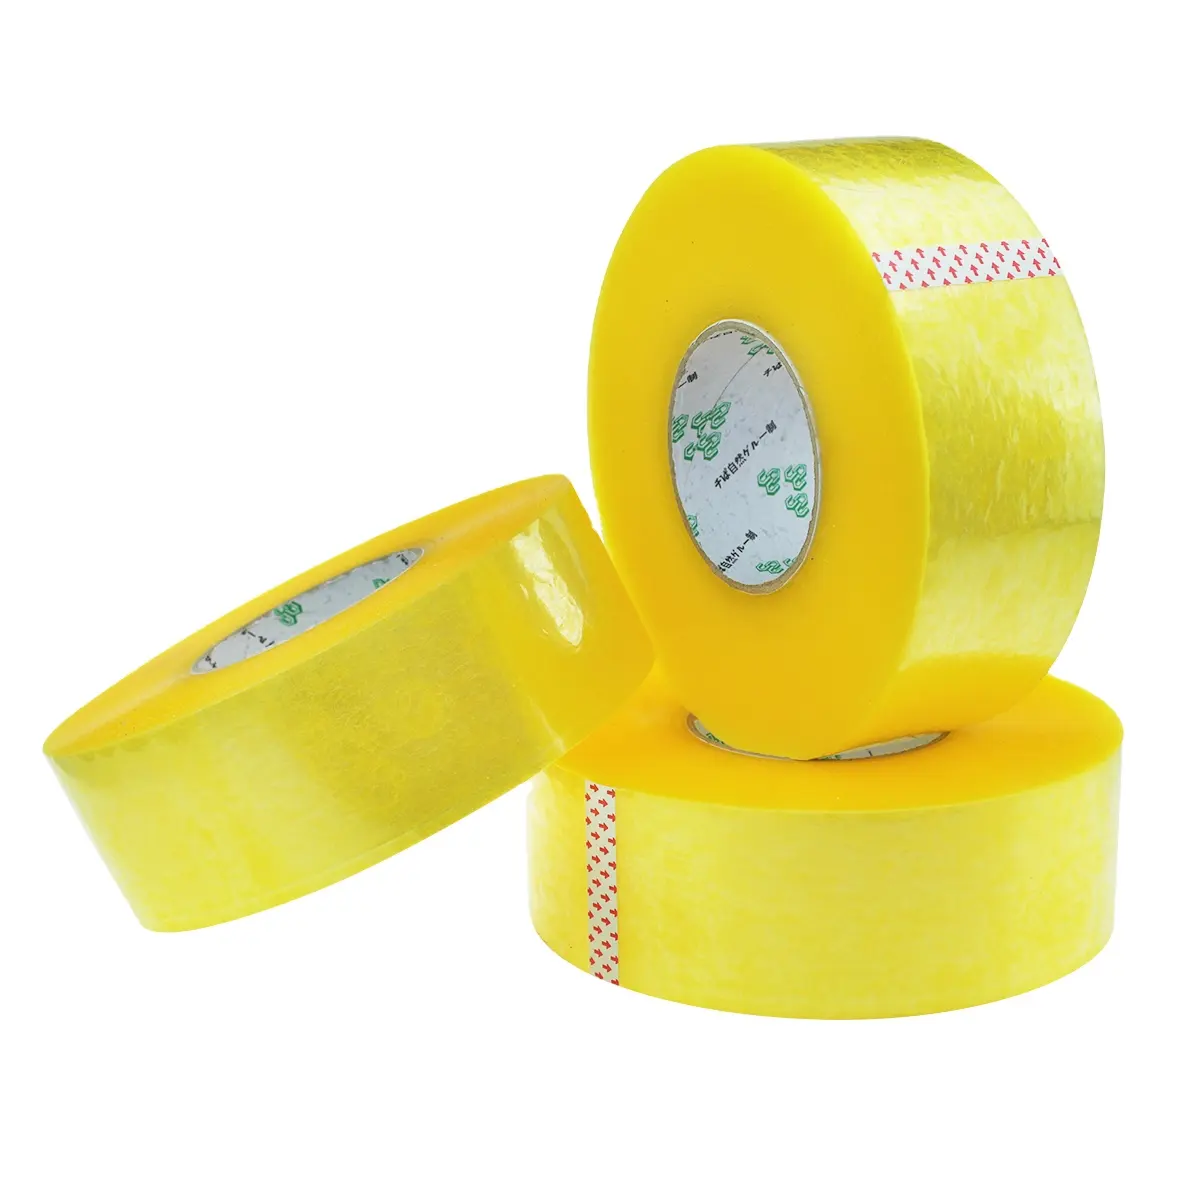 Adhesive Tape for Carton 4.7cm x 100yard x 50mic Adhesive Tape For Cars Wholesale Paper Tape For Cardboard Boxes Made In Vietnam